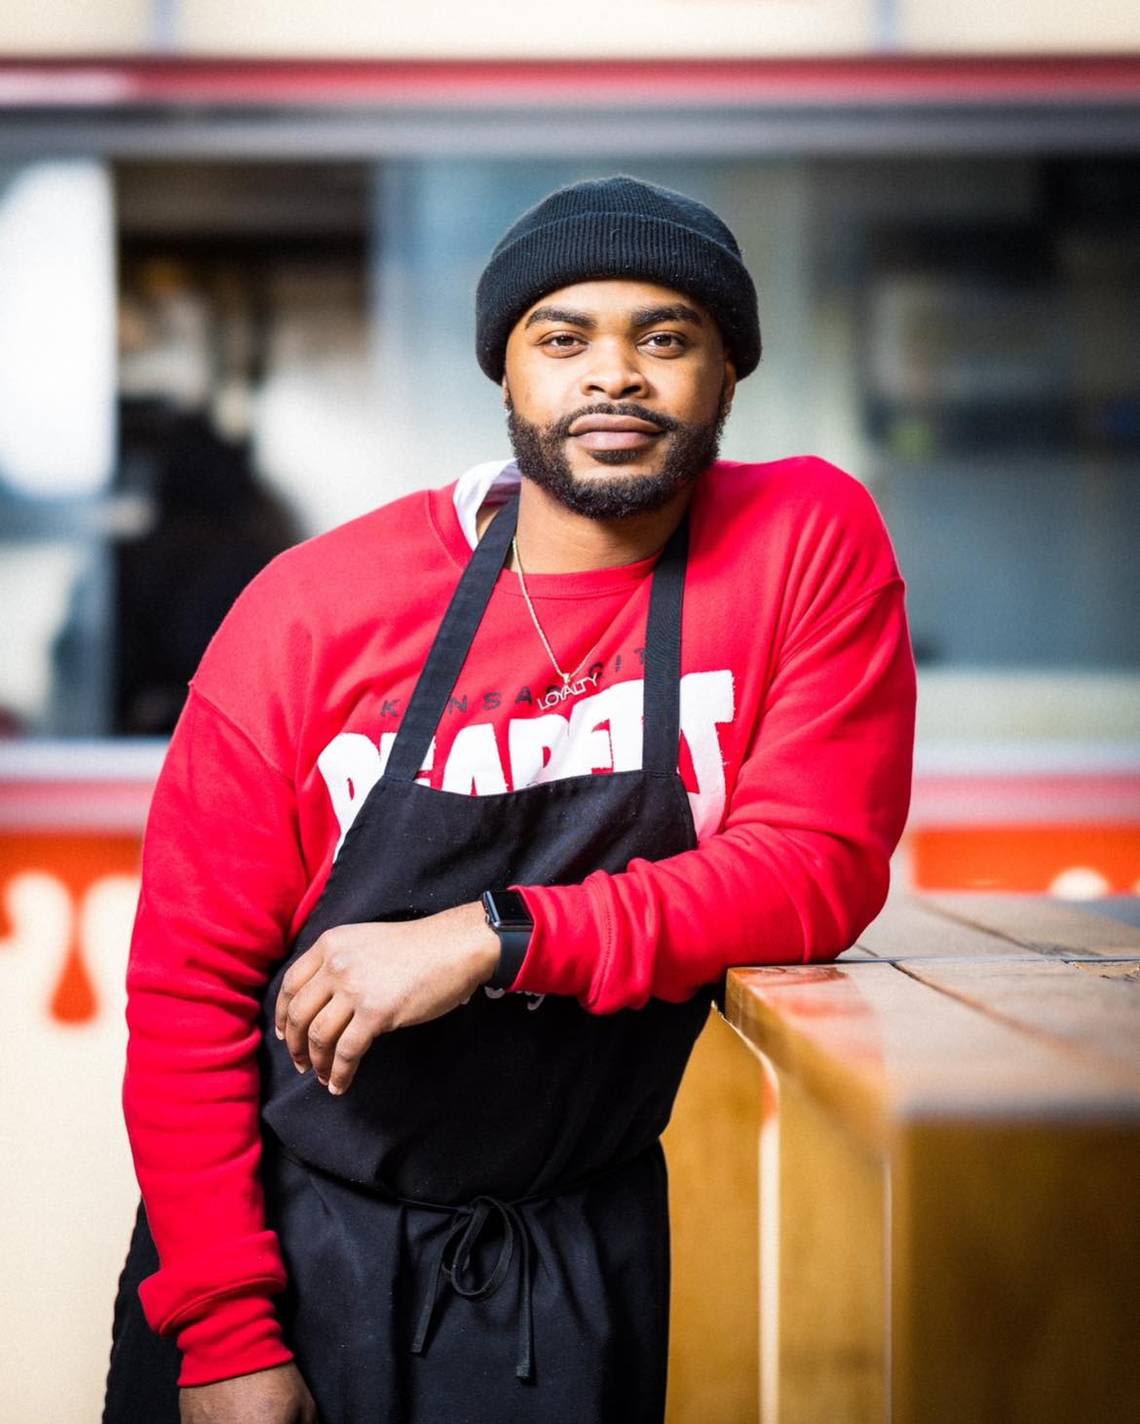 KC chef from ‘Hell’s Kitchen’ is using his culinary skills to unify community at home